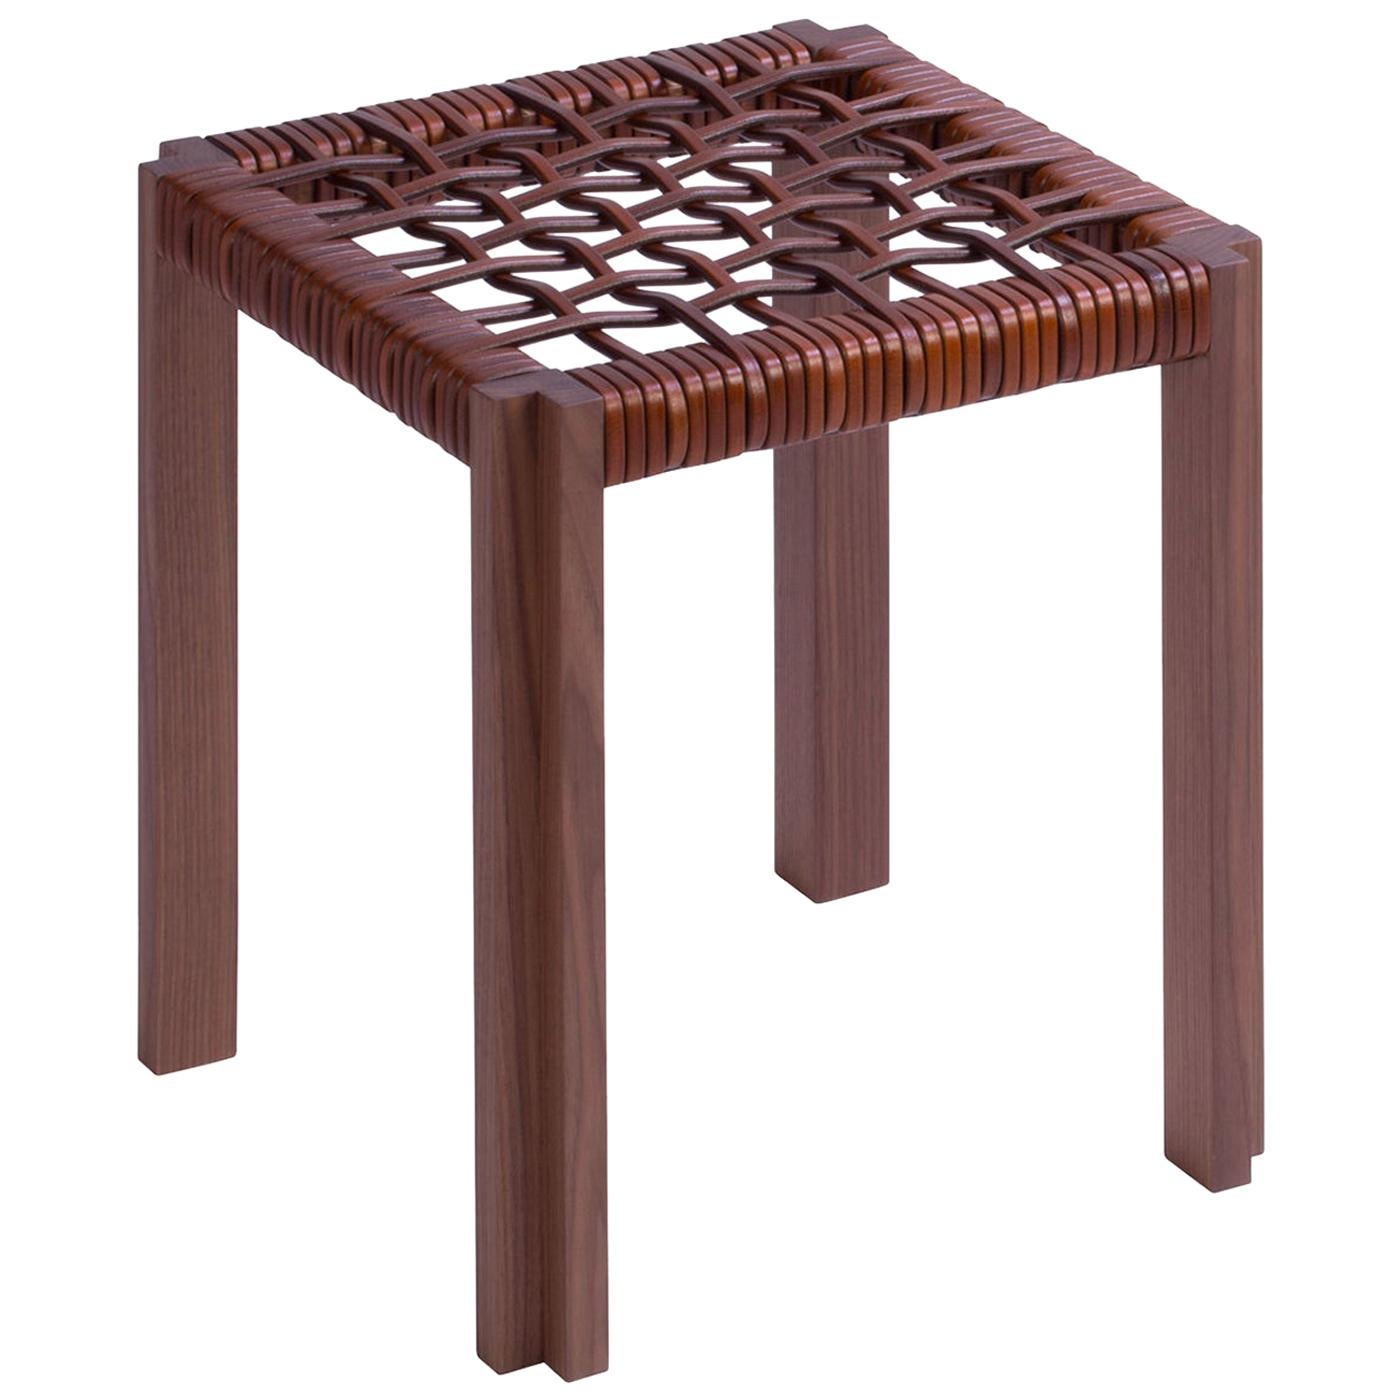 Enlaced Leather Stool